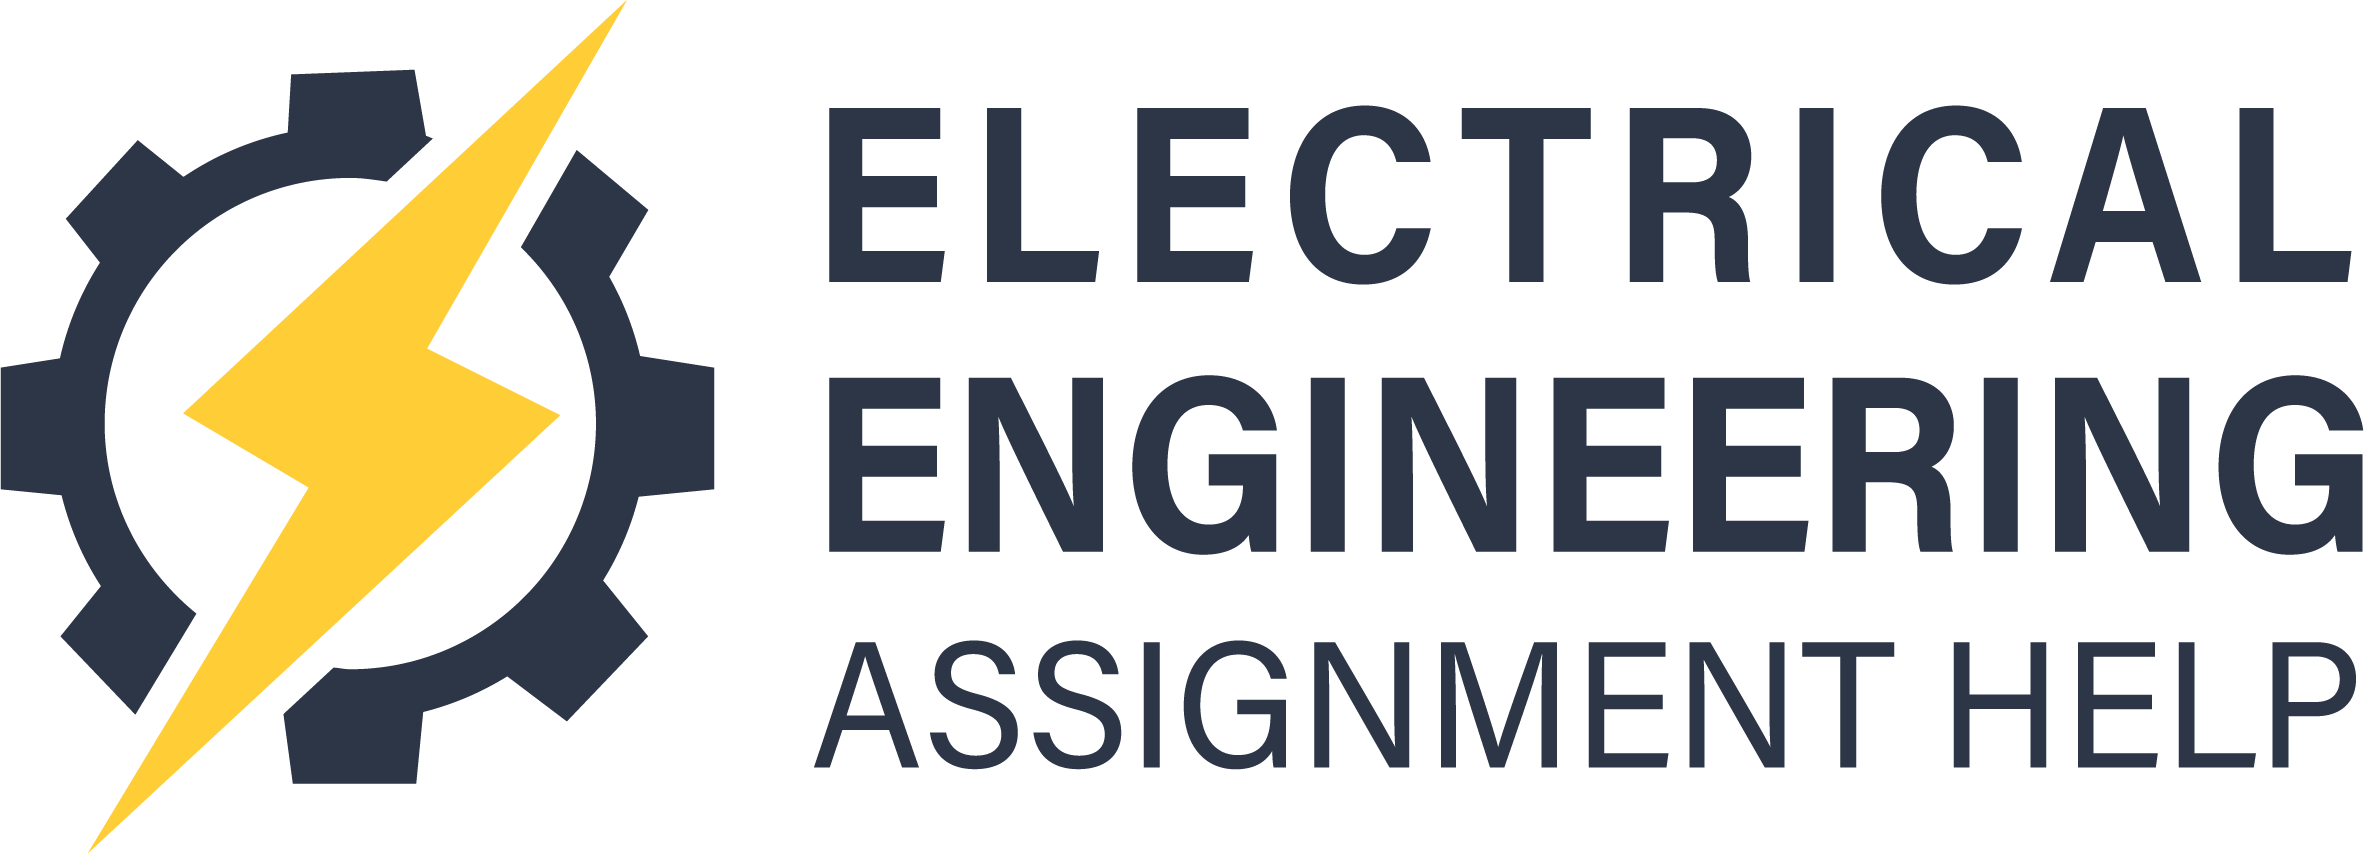 Professional Electrical Engineering Assignment Help Online